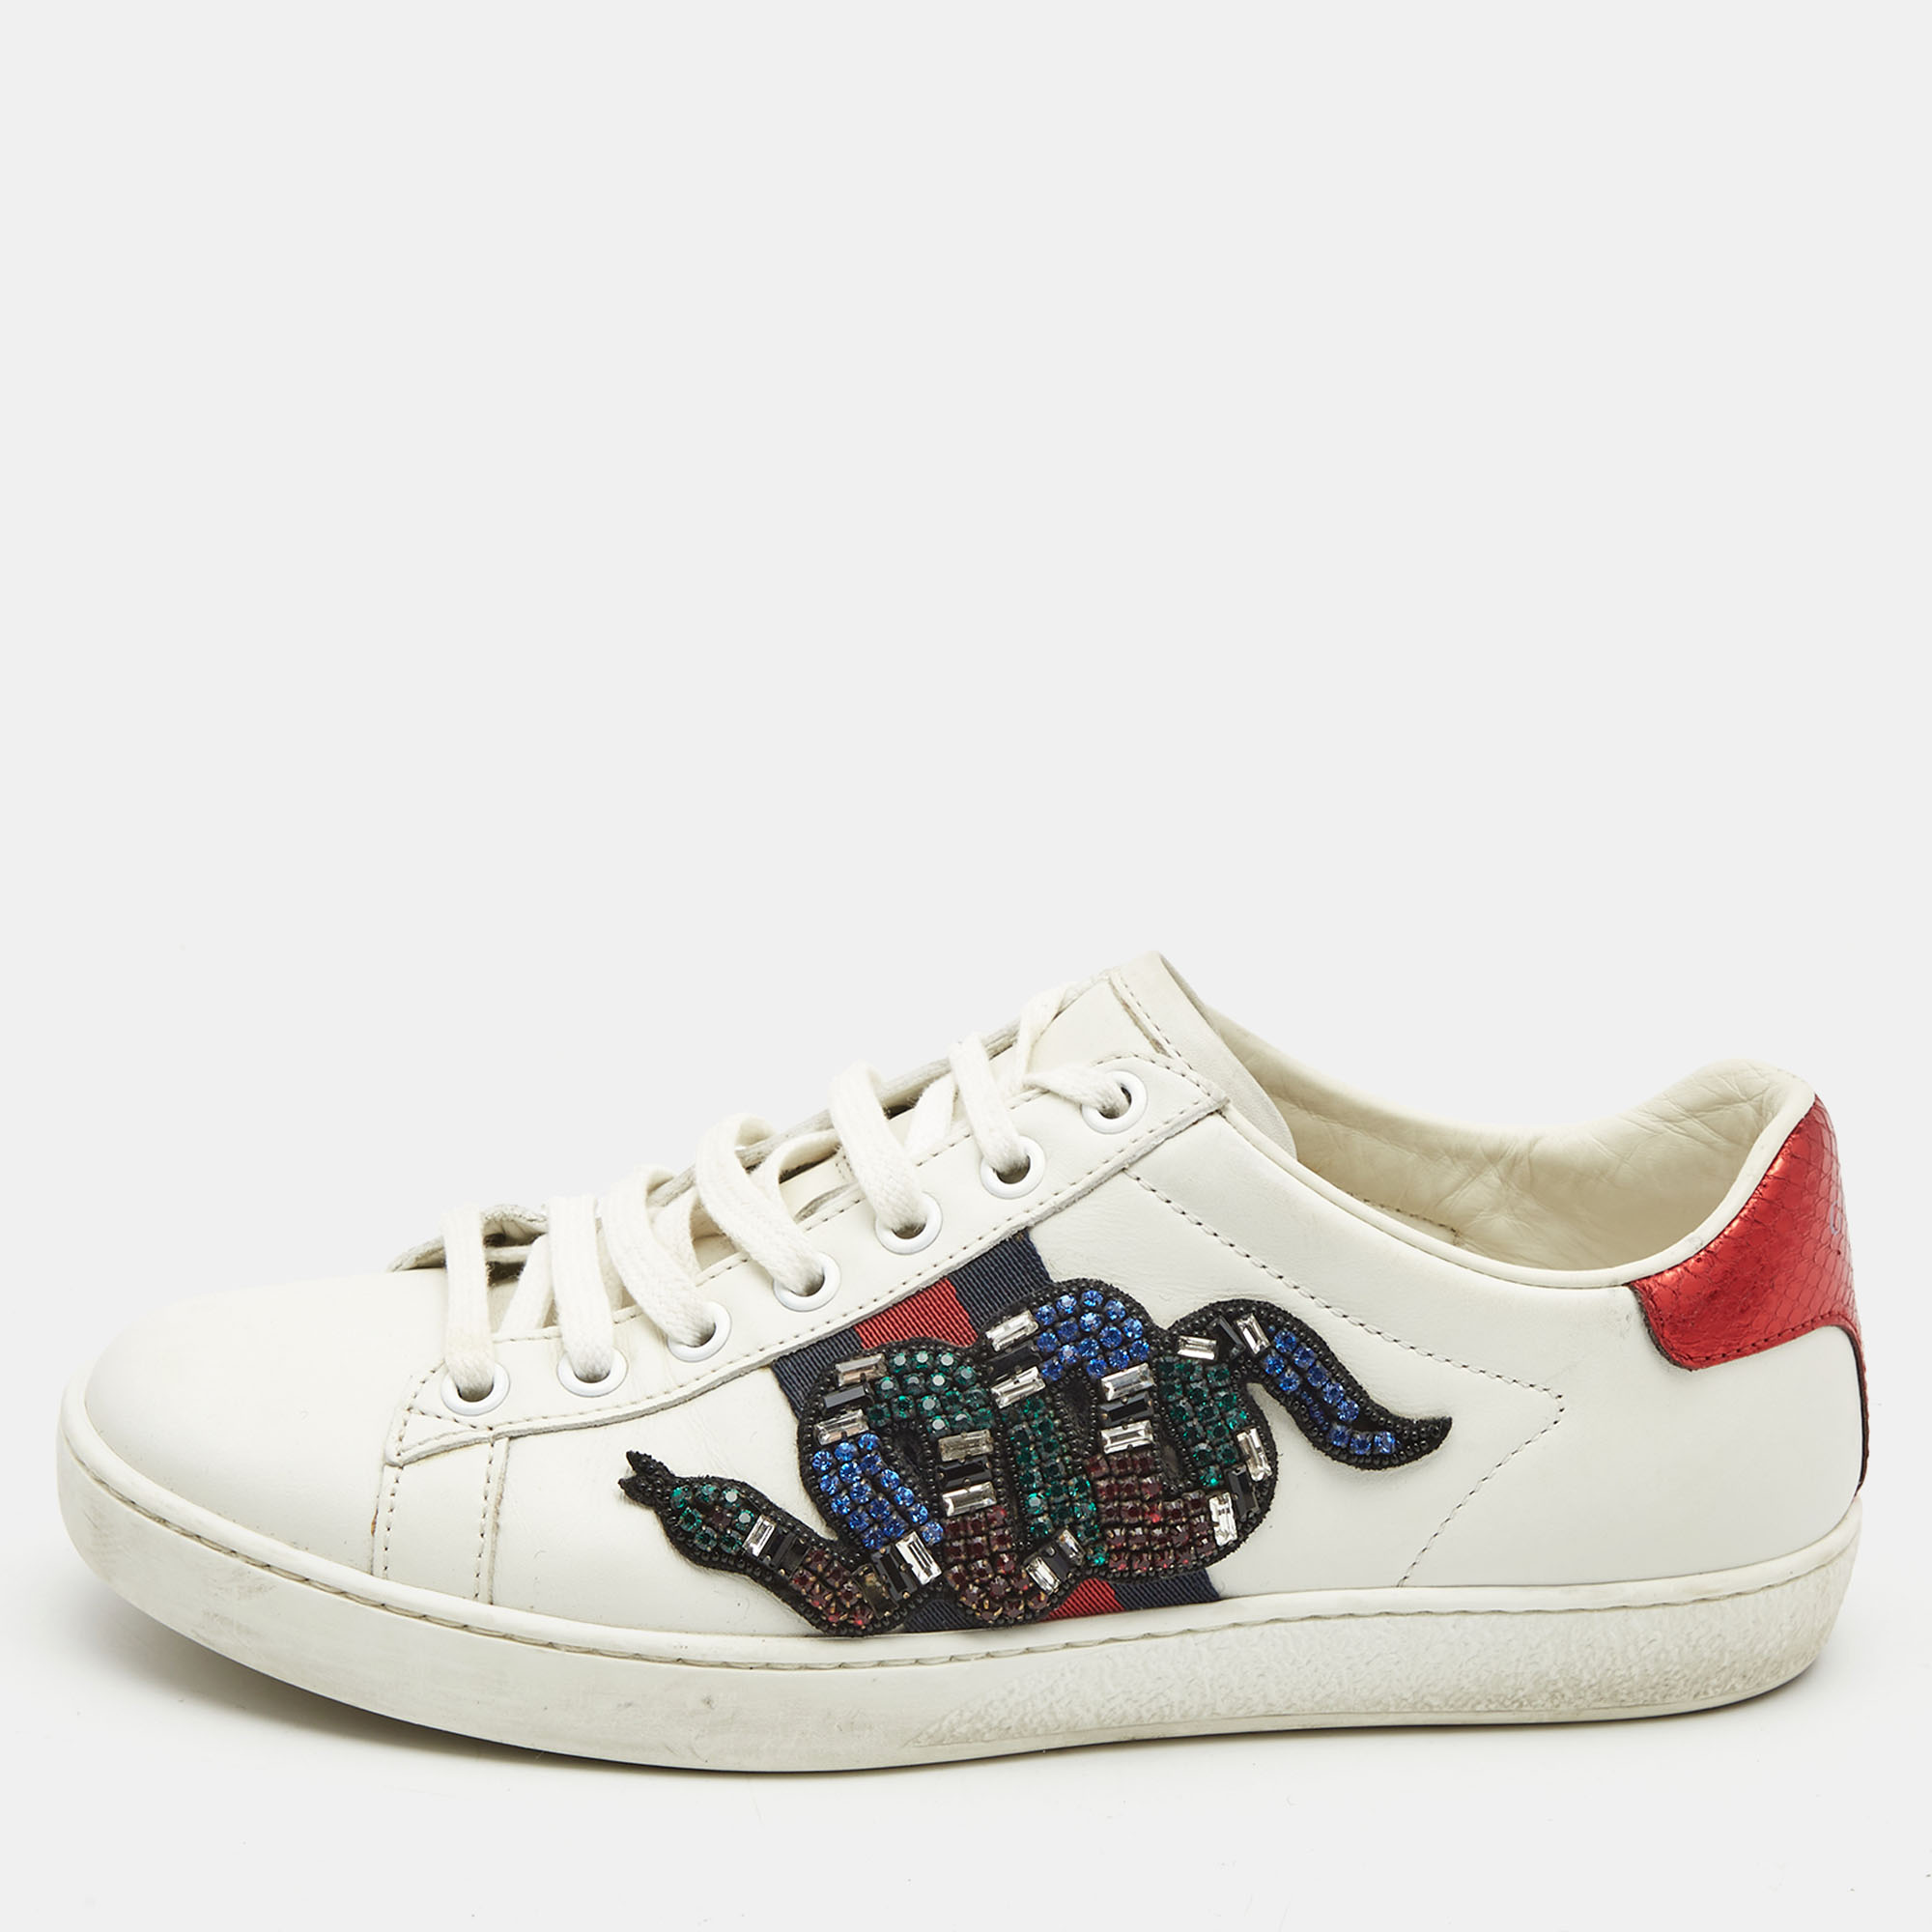 Pre-owned Gucci White Leather Embellished Snake Ace Sneakers Size 37